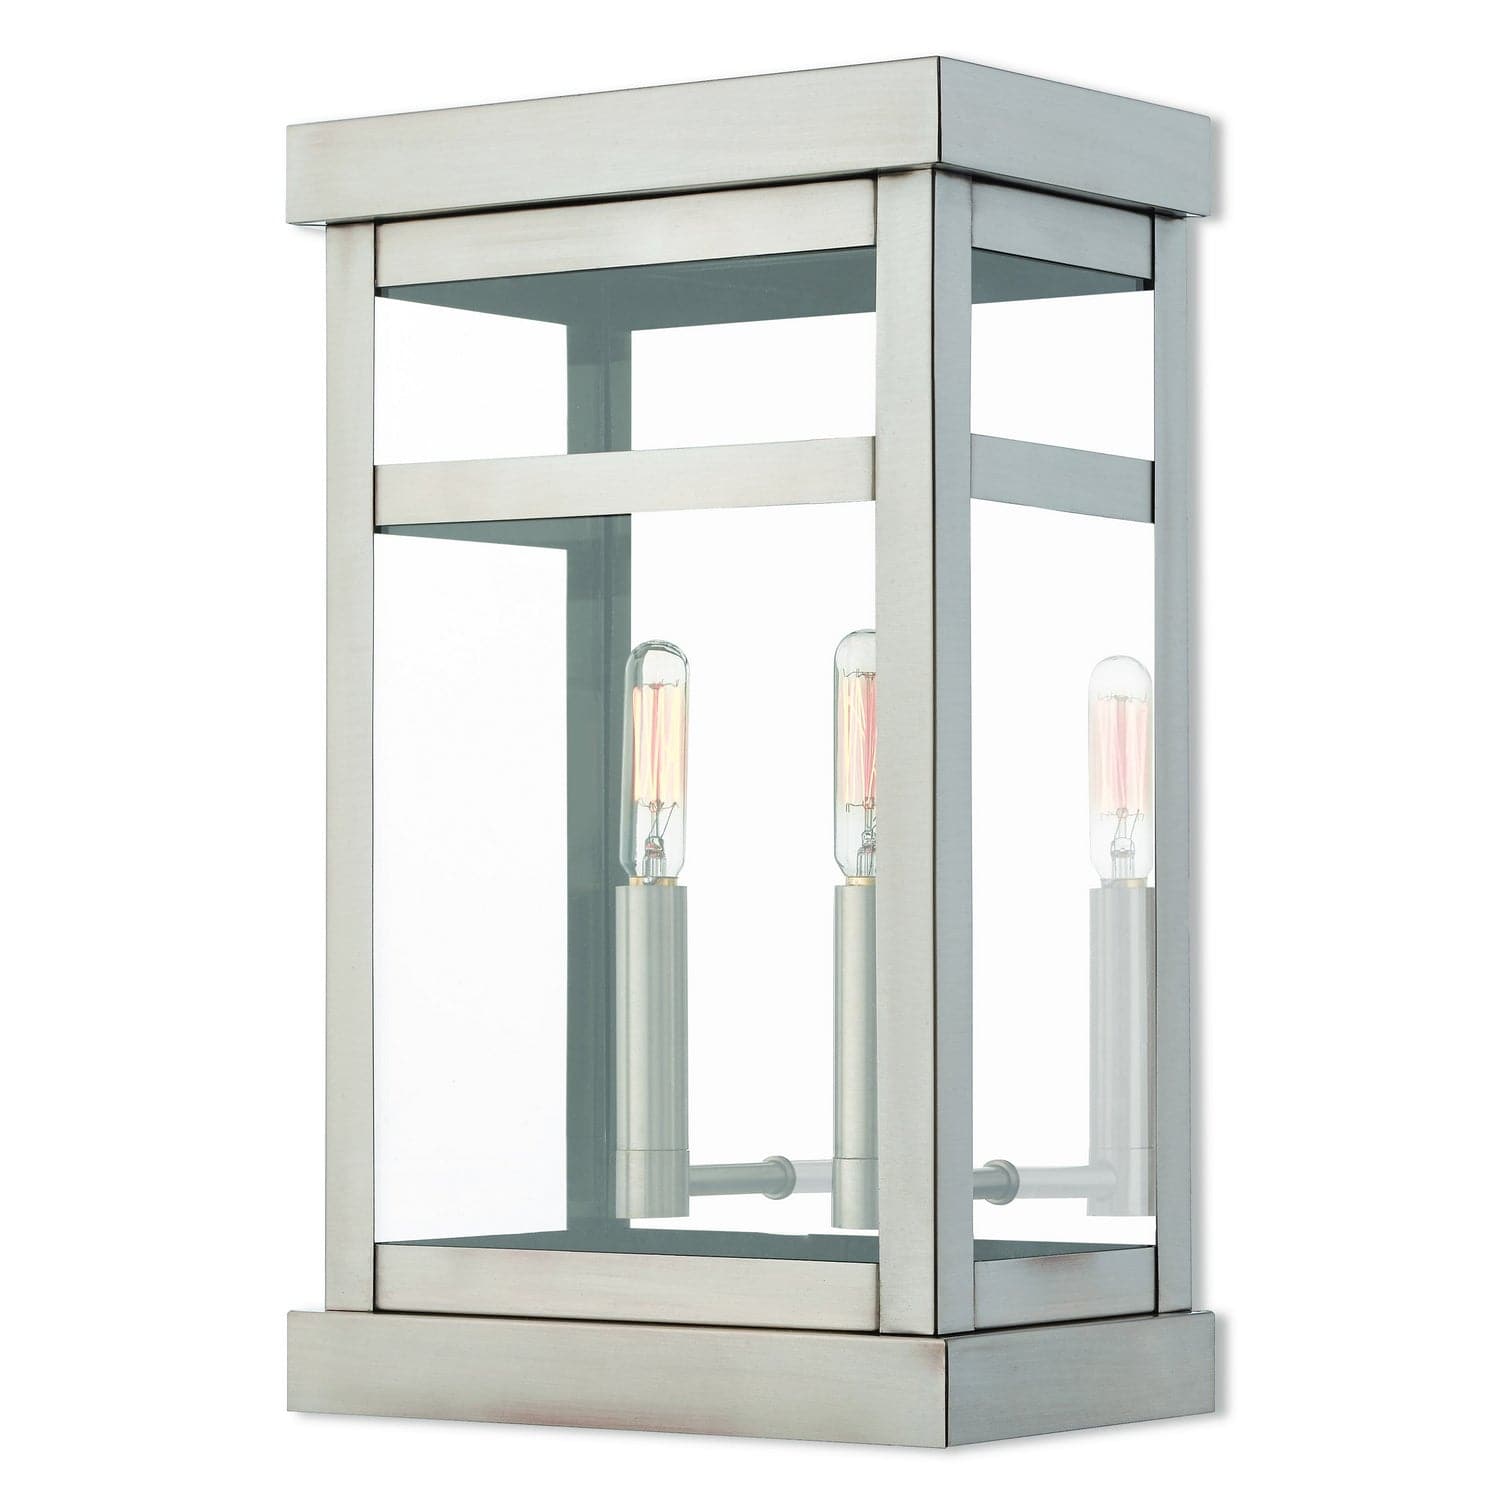 Livex Lighting - 20705-91 - Two Light Outdoor Wall Lantern - Hopewell - Brushed Nickel w/ Polished Chrome Stainless Steel